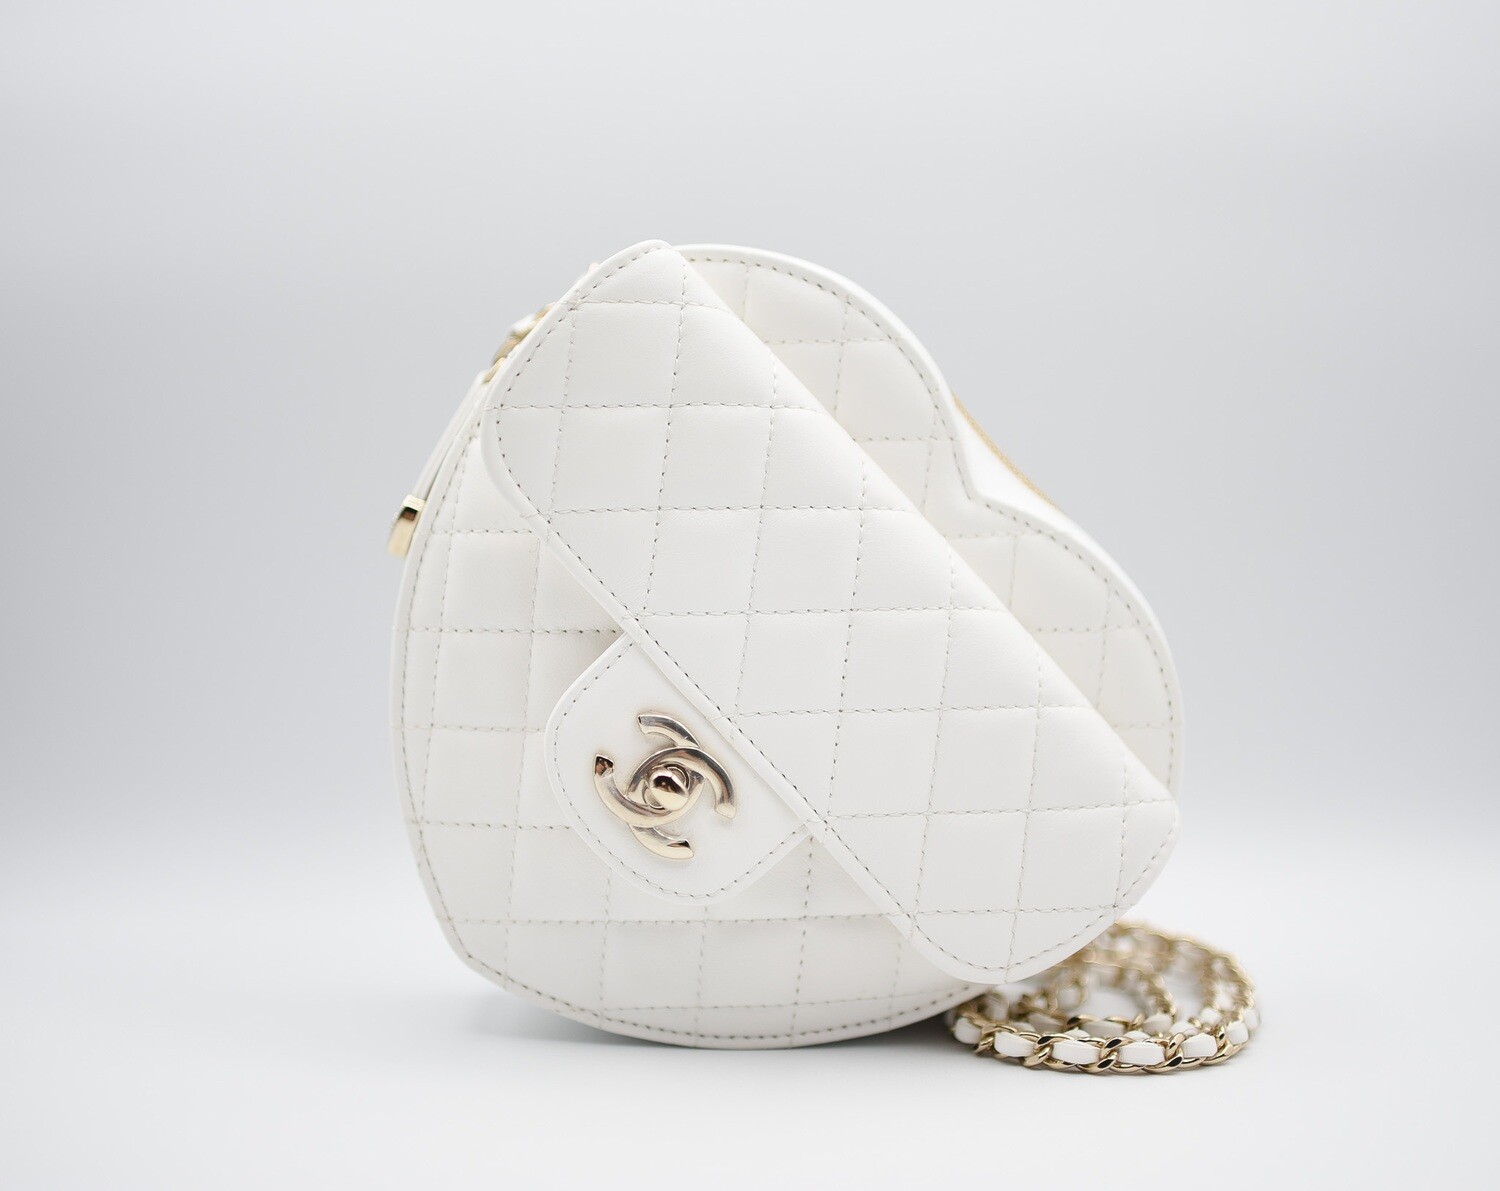 Chanel Heart Bag Large, White Lambskin Leather, Gold Hardware, New in Box  GA001